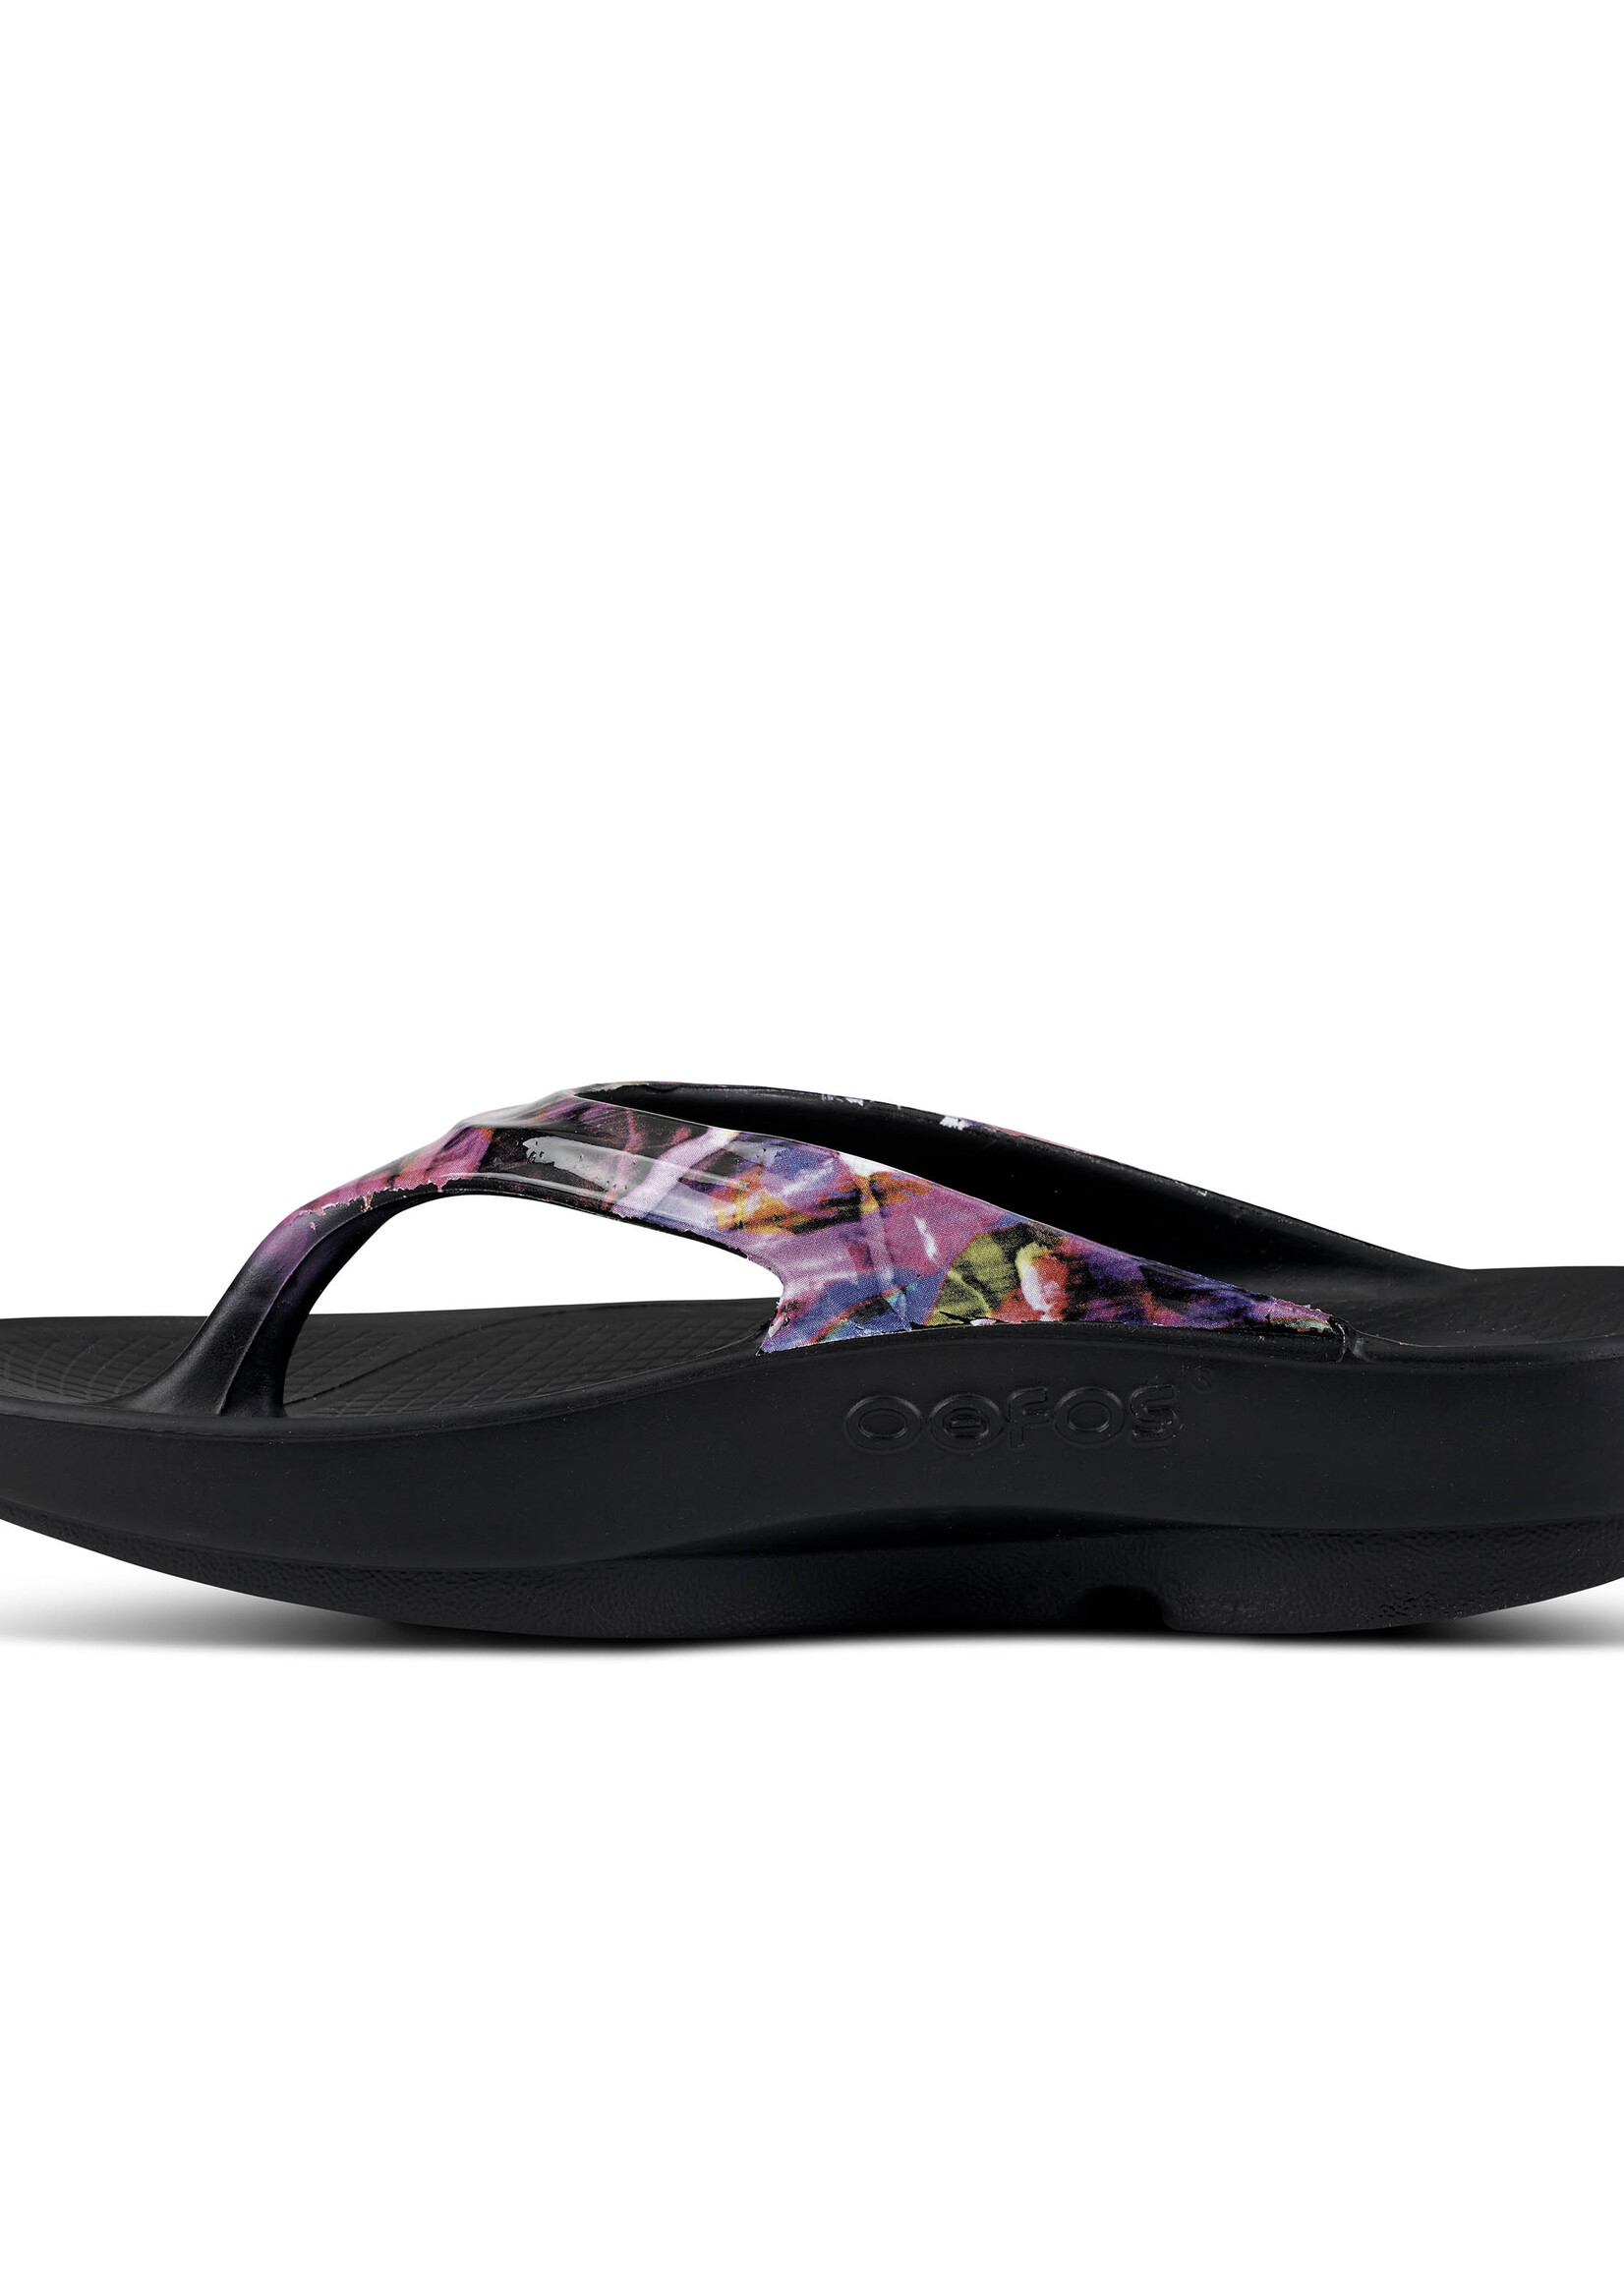 OOFOS WOMEN'S OOLALA LIMITED SANDAL